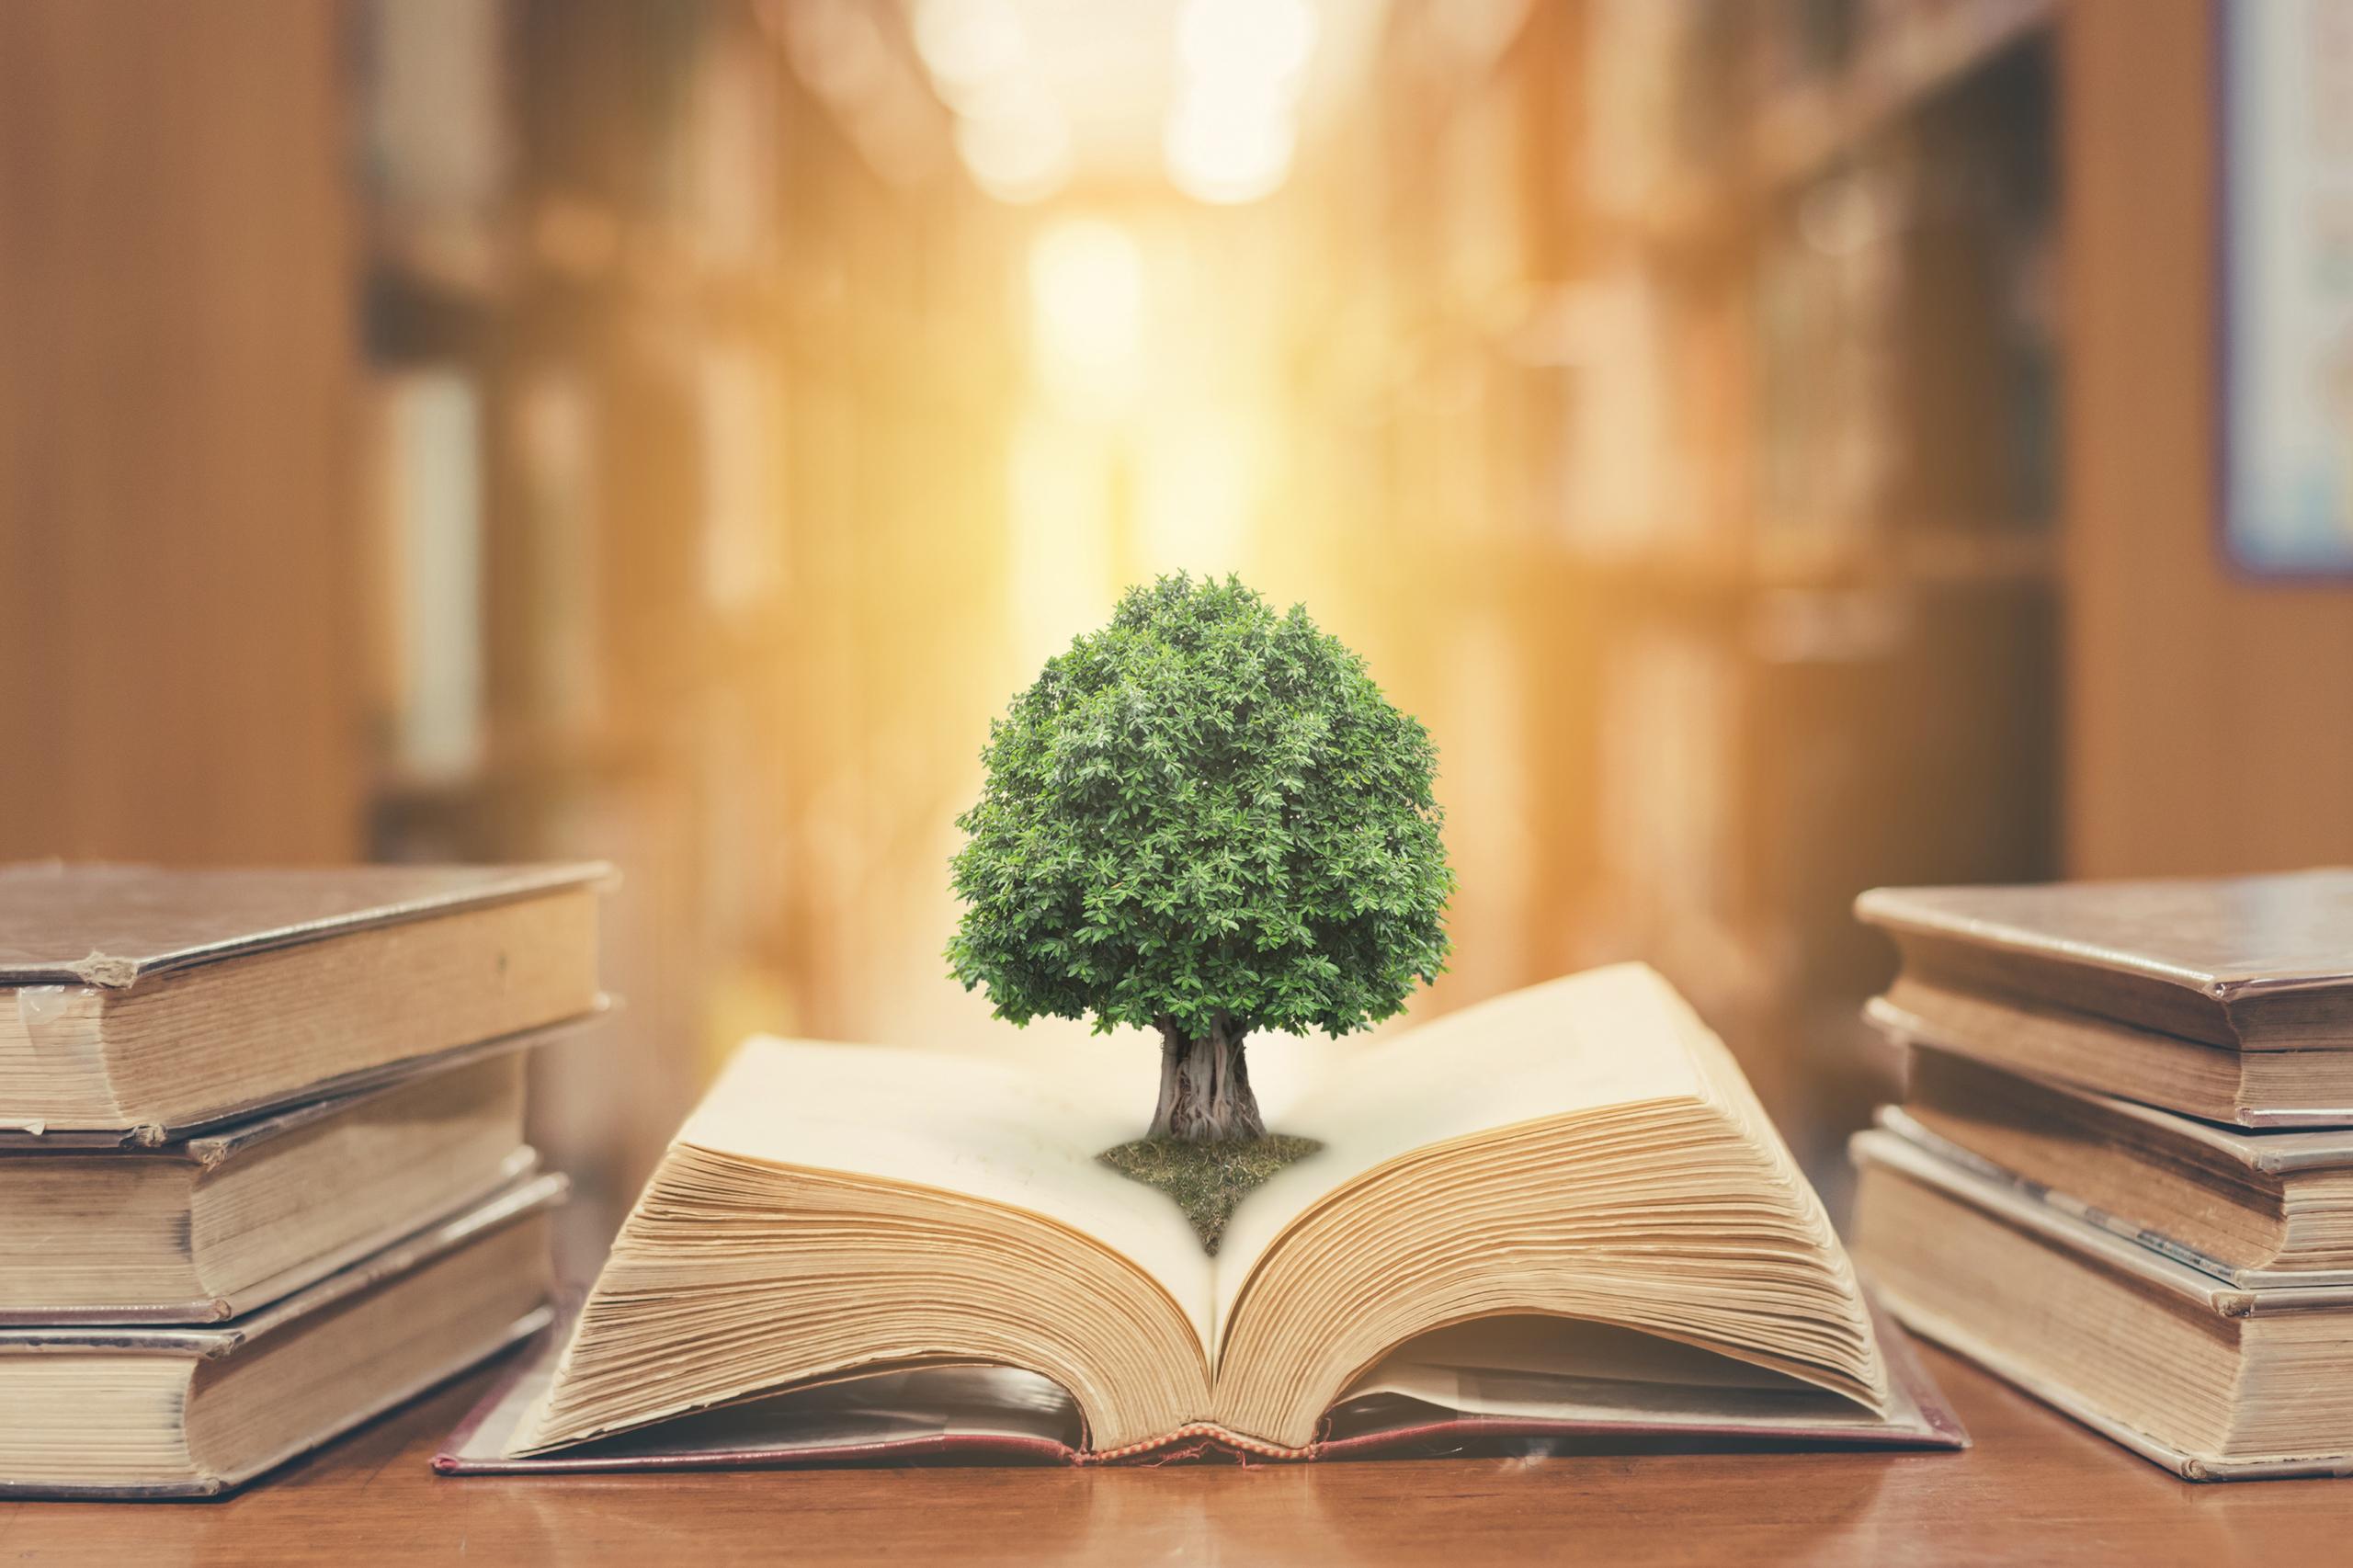 World philosophy day concept with tree of knowledge planting on opening old big book in library full with textbook, stack piles of text archive and blur aisle of bookshelves in school study class room